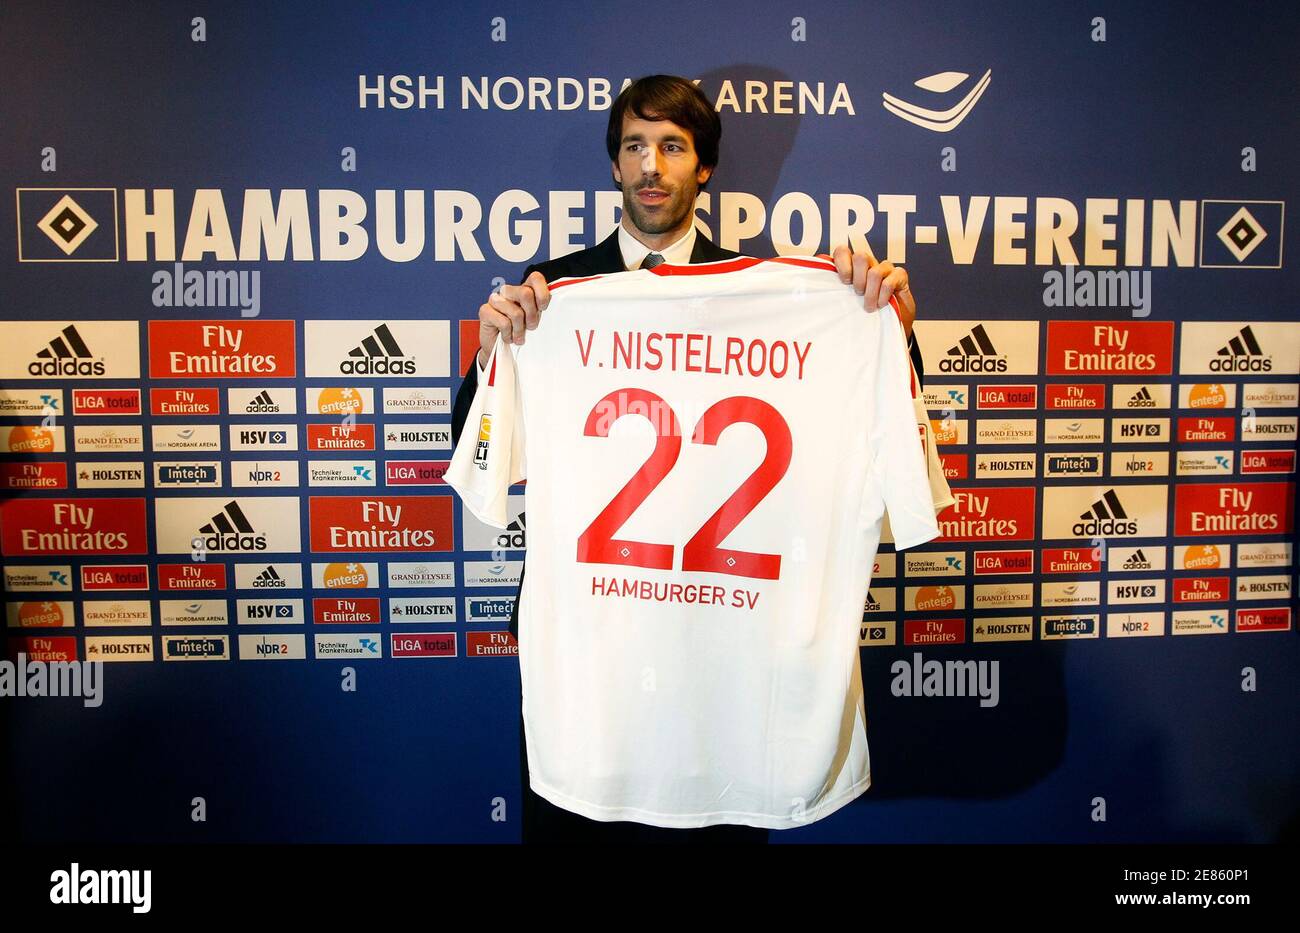 Dutch striker Ruud van Nistelrooy poses with his new jersey during a news  conference at German Bundesliga soccer team Hamburg SV in Hamburg January  25, 2010. Hamburg SV have signed the 33-year-old